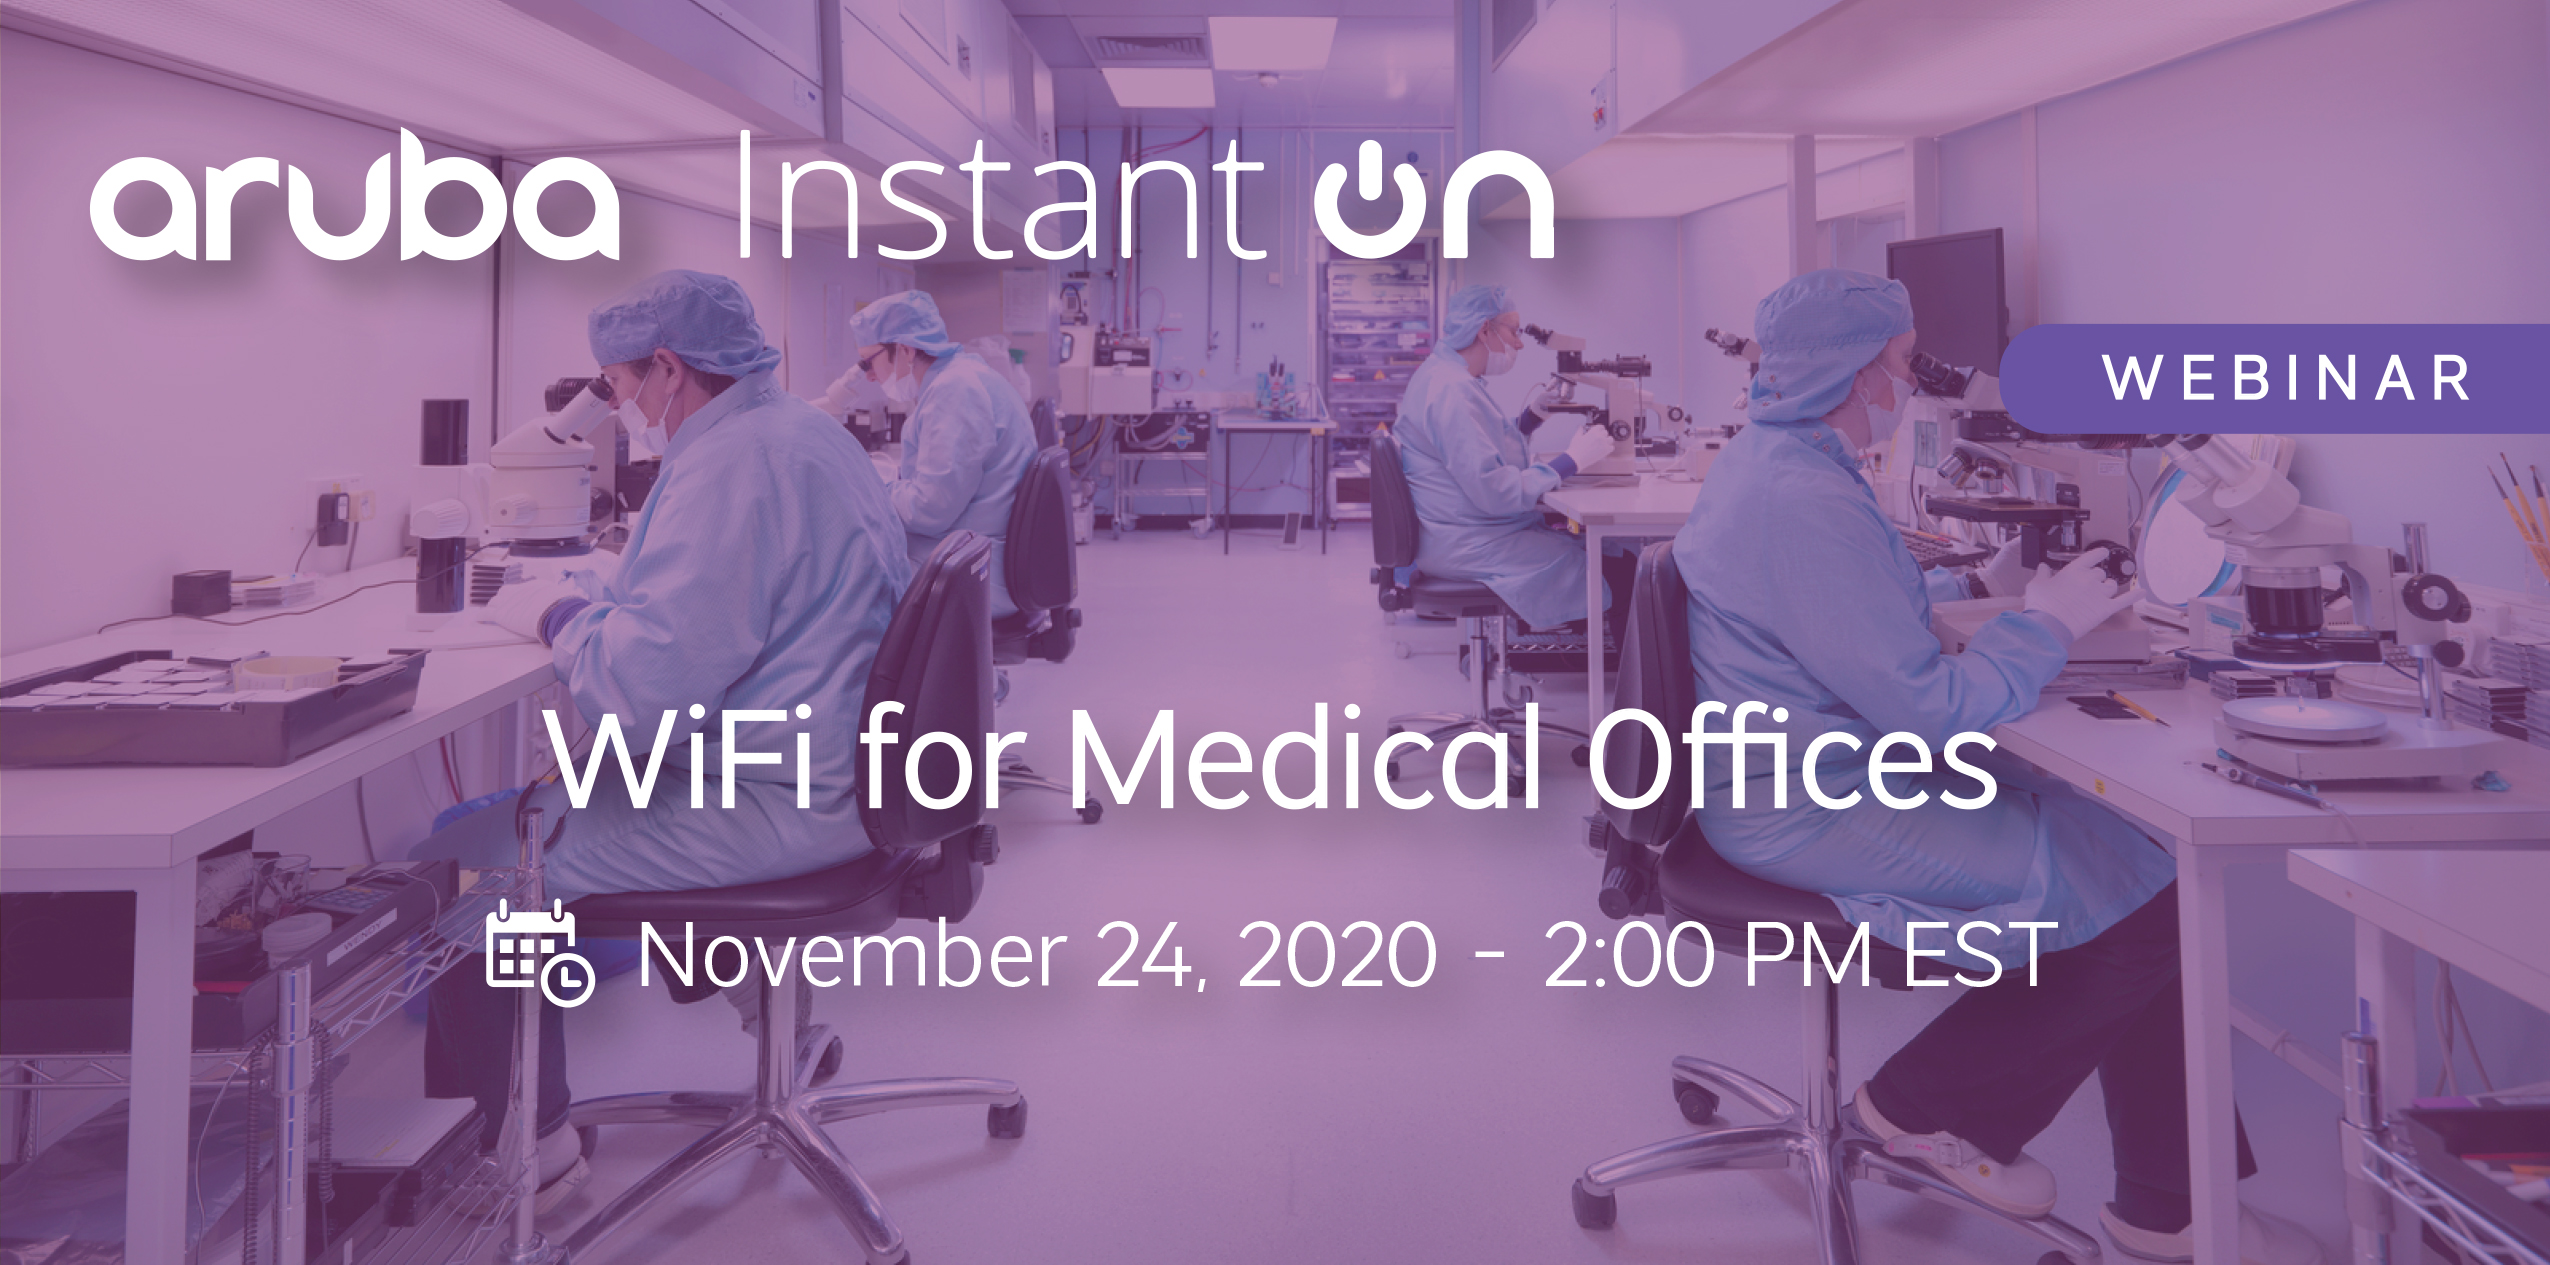 WiFi For Medical Offices Event